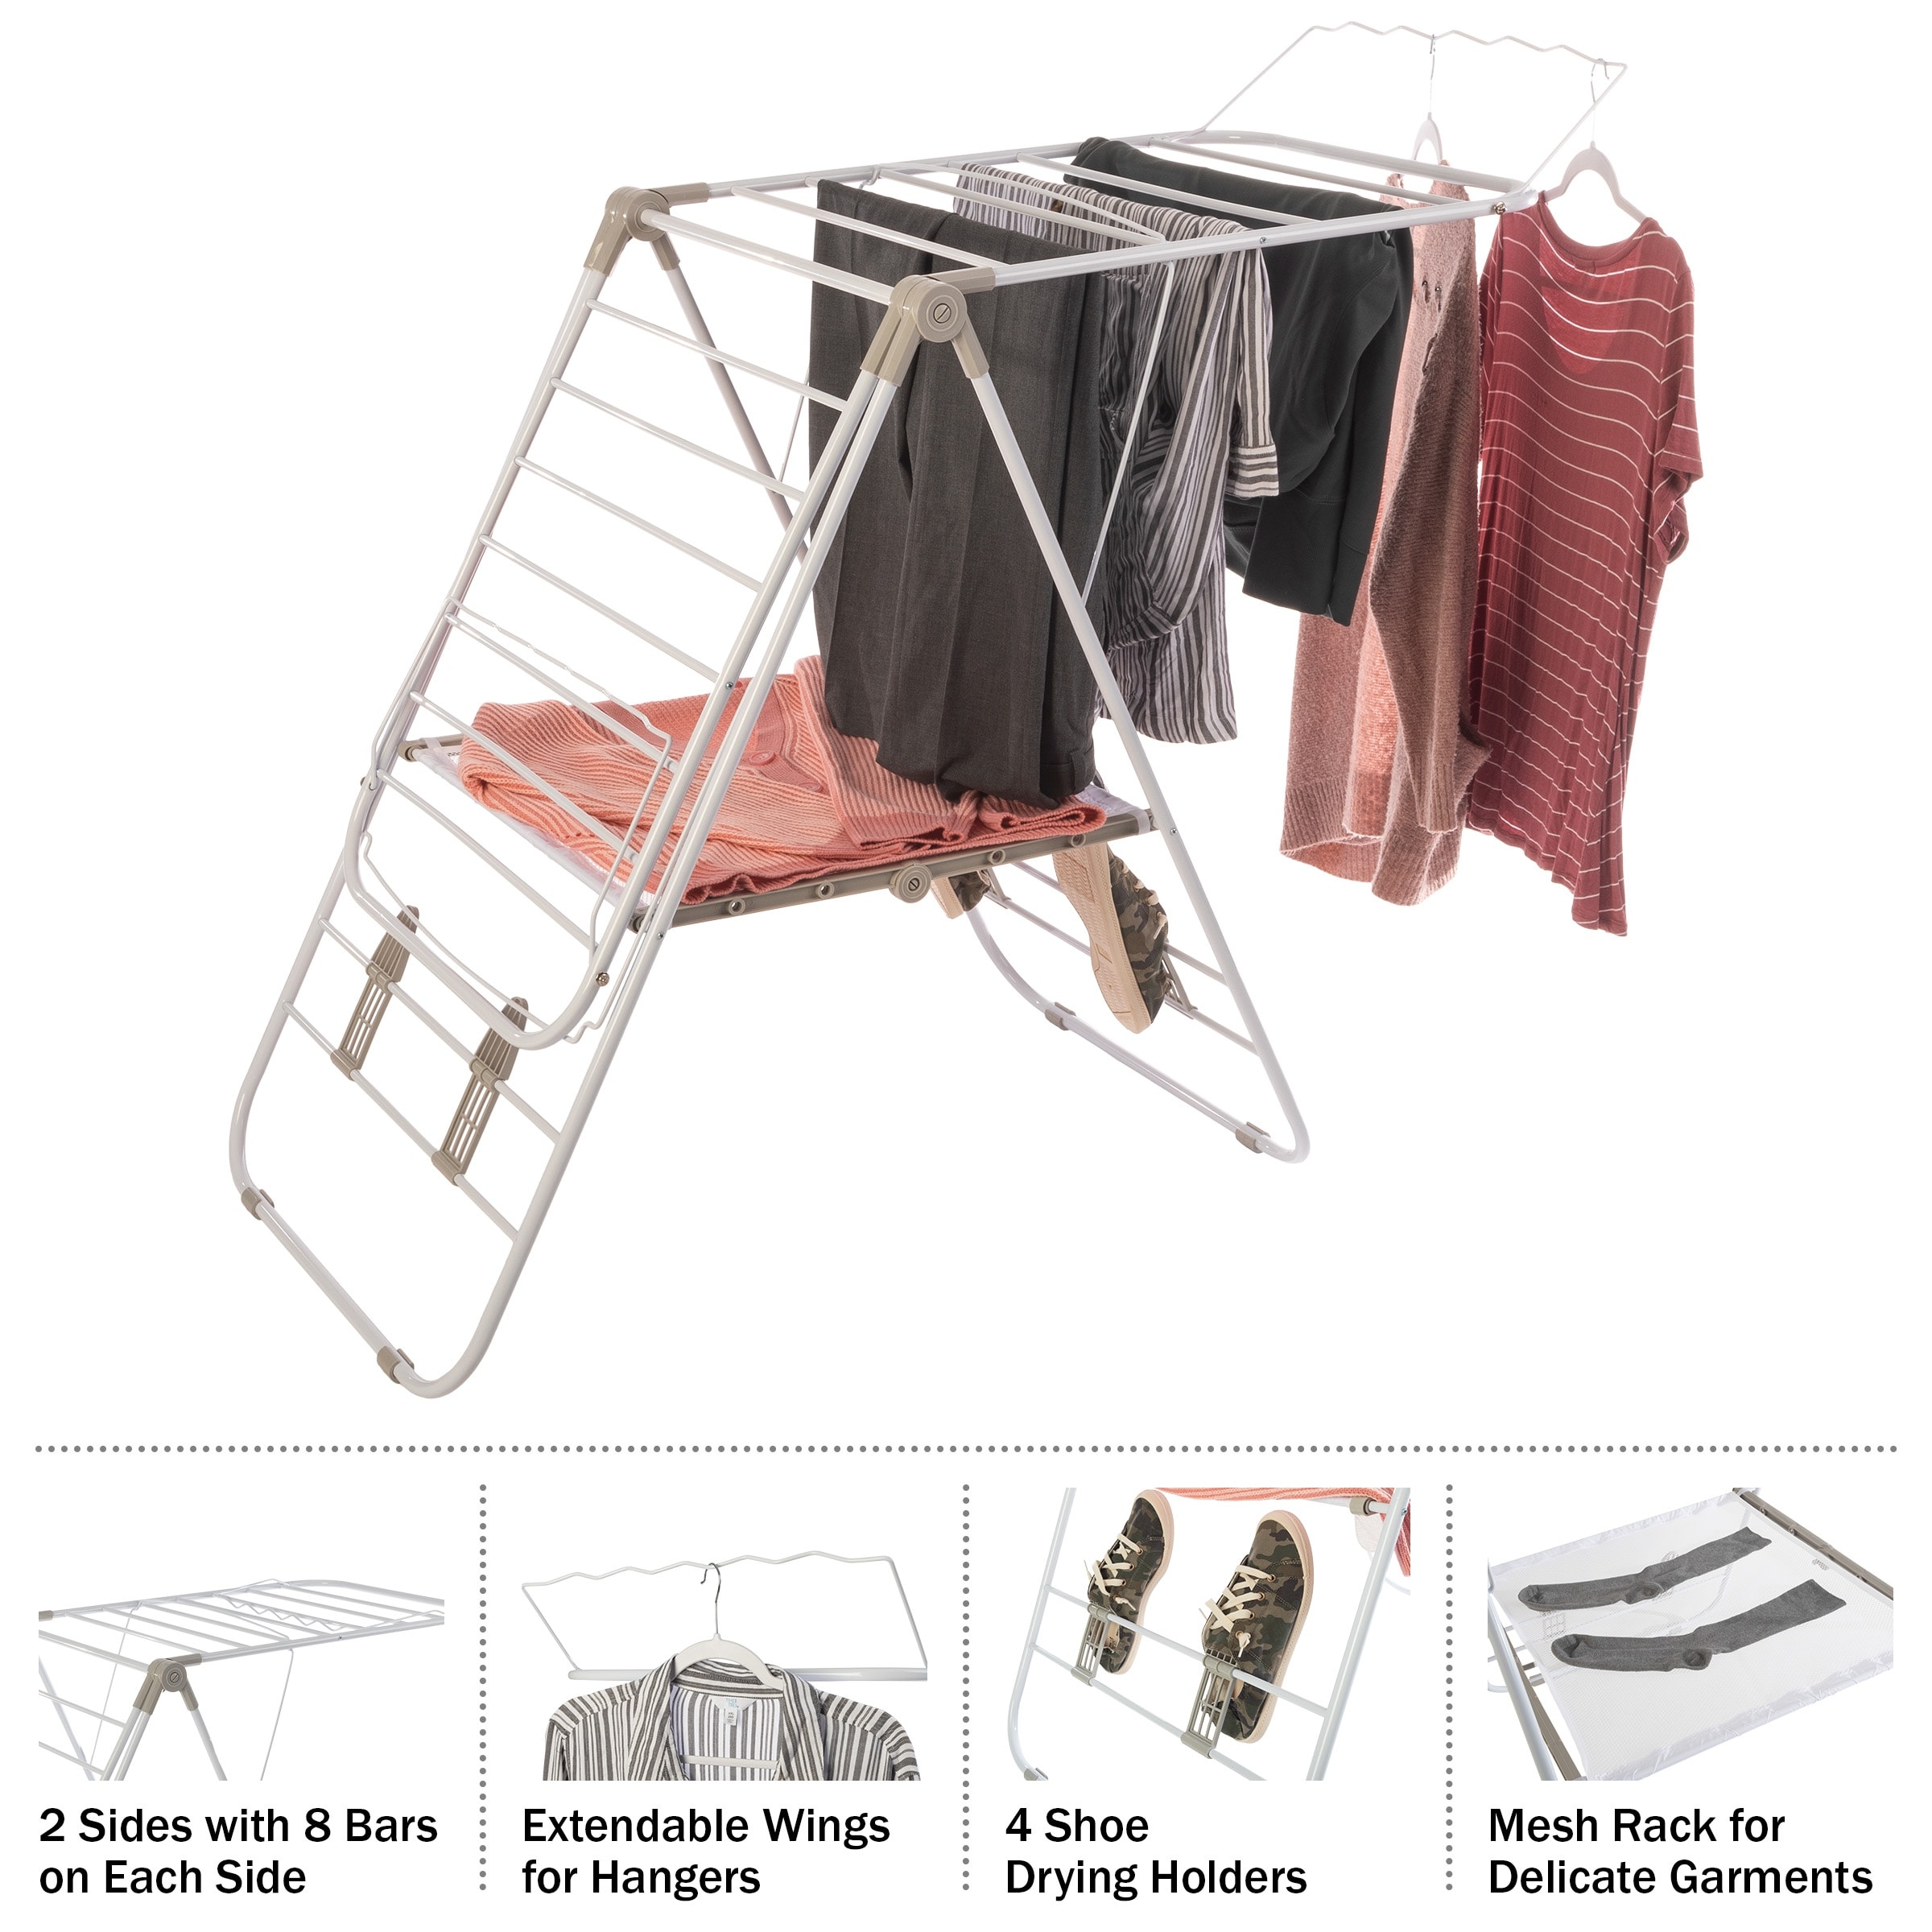 Clothes Drying Rack - Indoor/Outdoor Portable Laundry Rack - Collapsible Clothes Stand by Everyday Home (White)